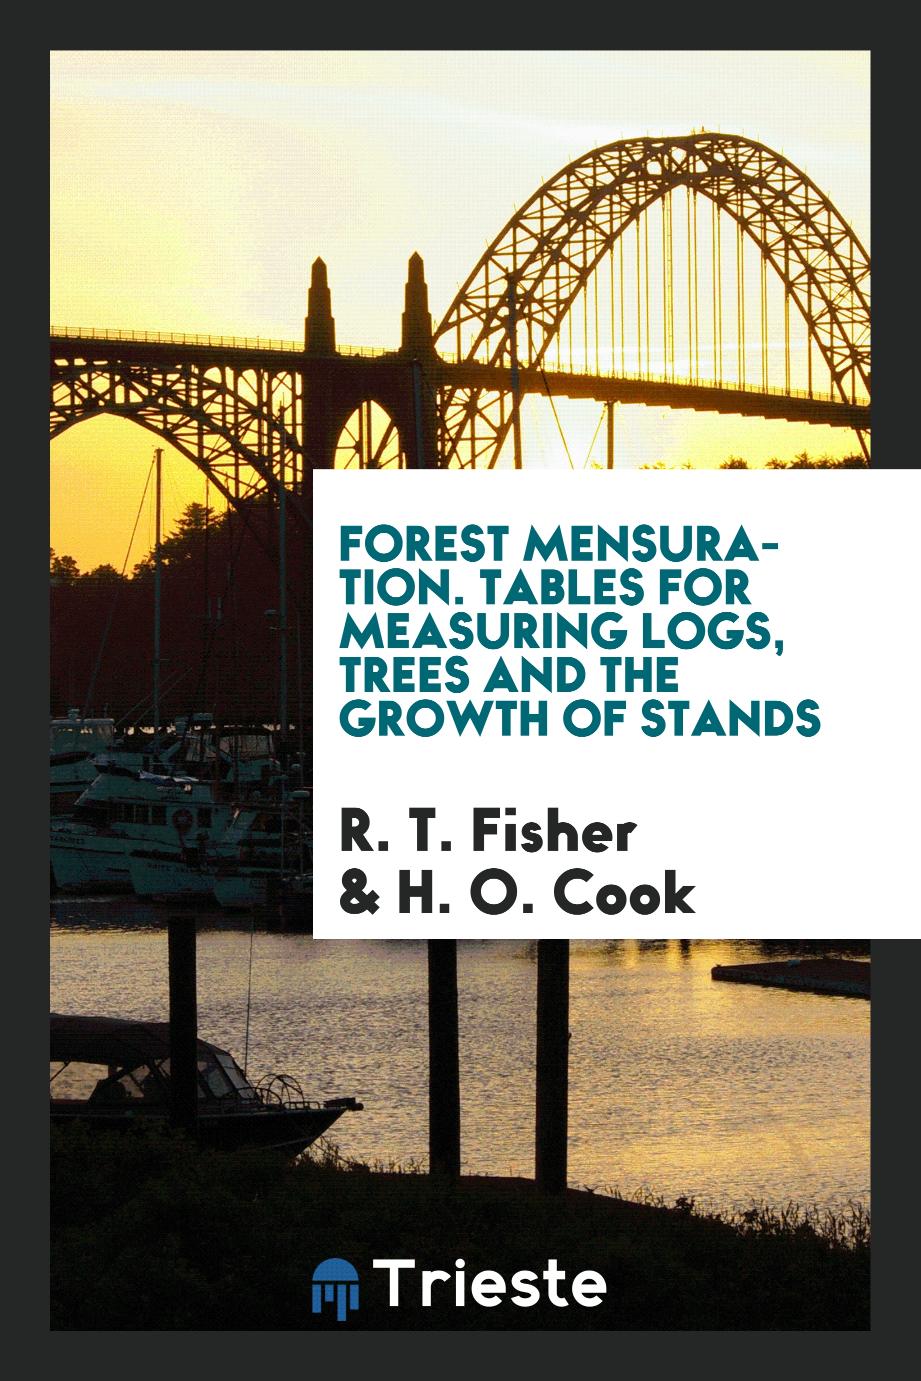 Forest mensuration. Tables for measuring logs, trees and the growth of stands